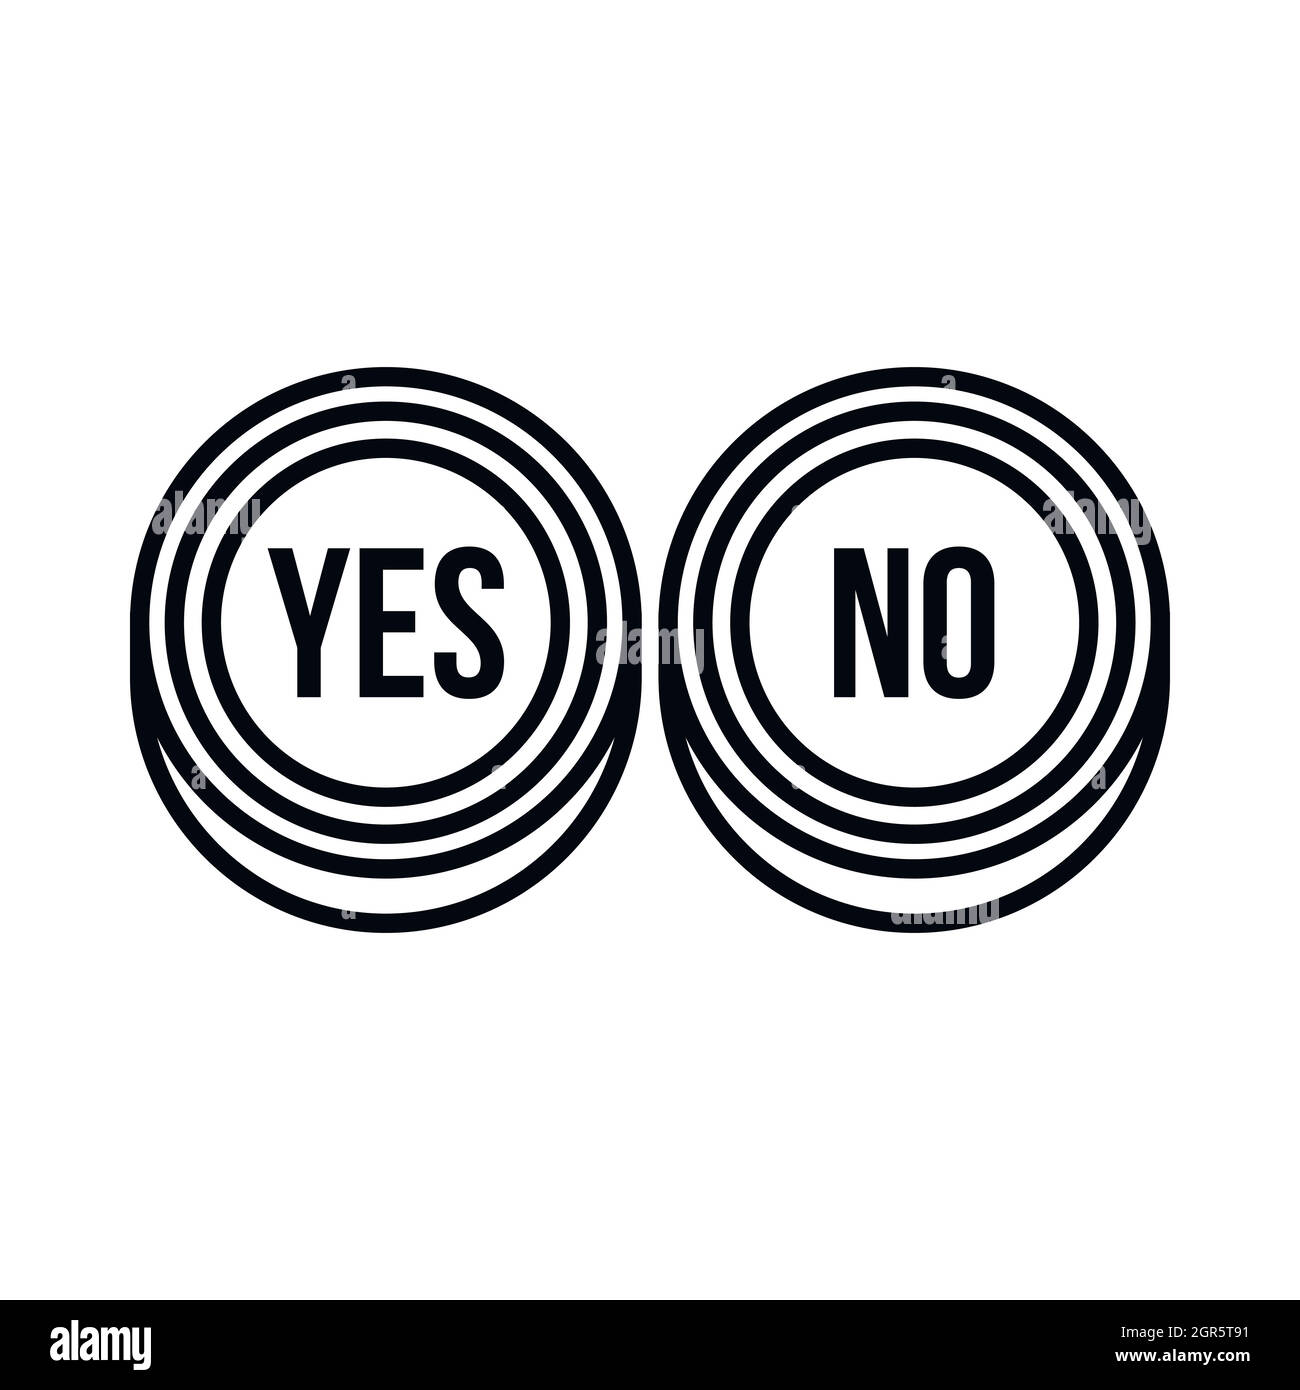 Yes and No buttons Stock Photo by ©scanrail 4914871